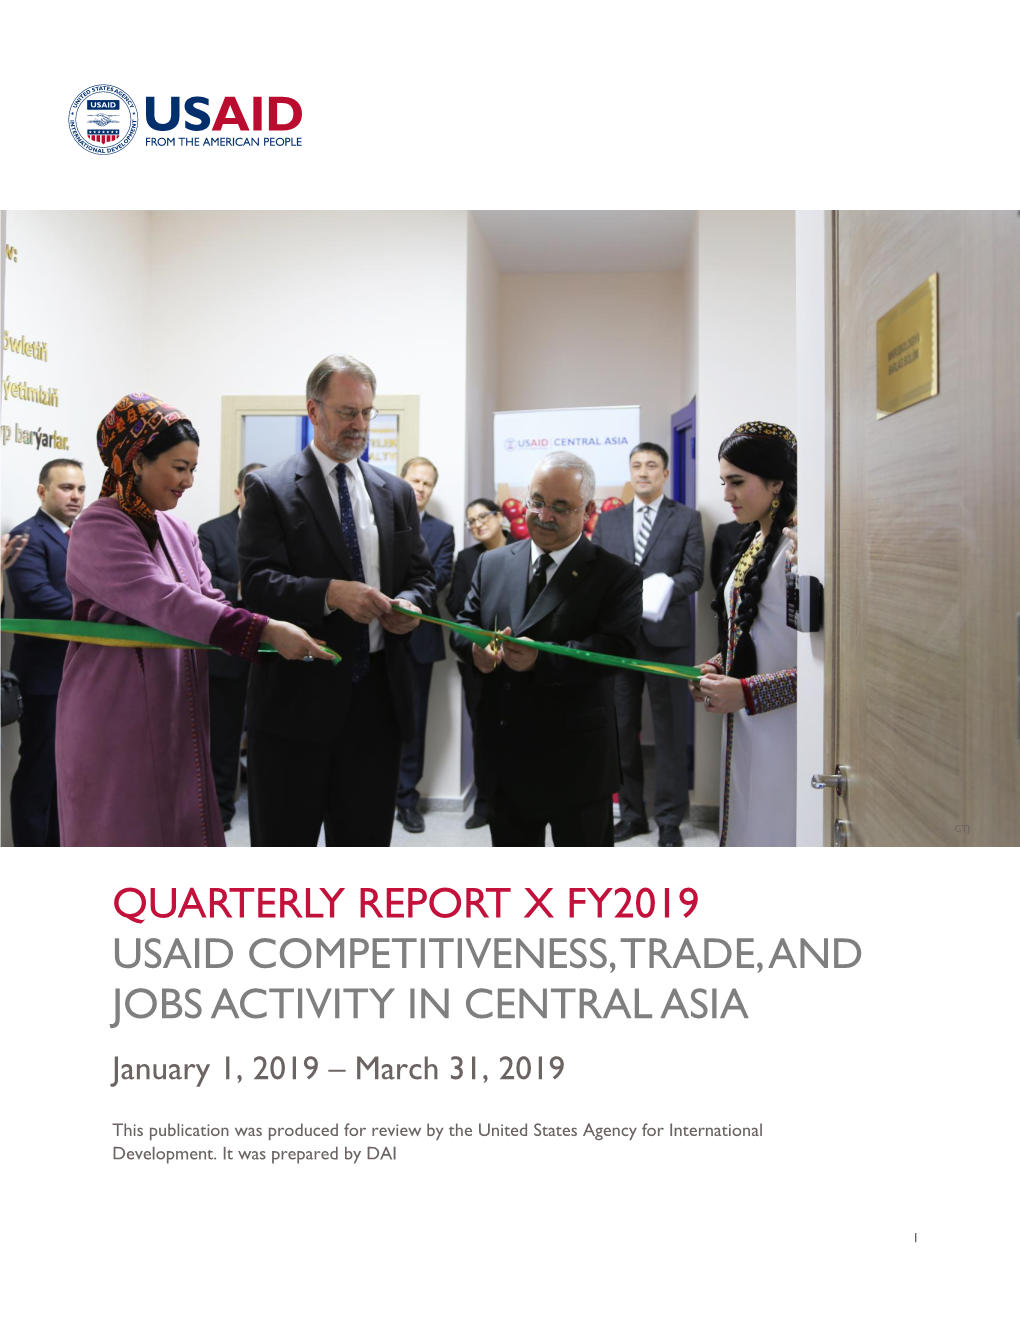 QUARTERLY REPORT X FY2019 USAID COMPETITIVENESS, TRADE, and JOBS ACTIVITY in CENTRAL ASIA January 1, 2019 – March 31, 2019